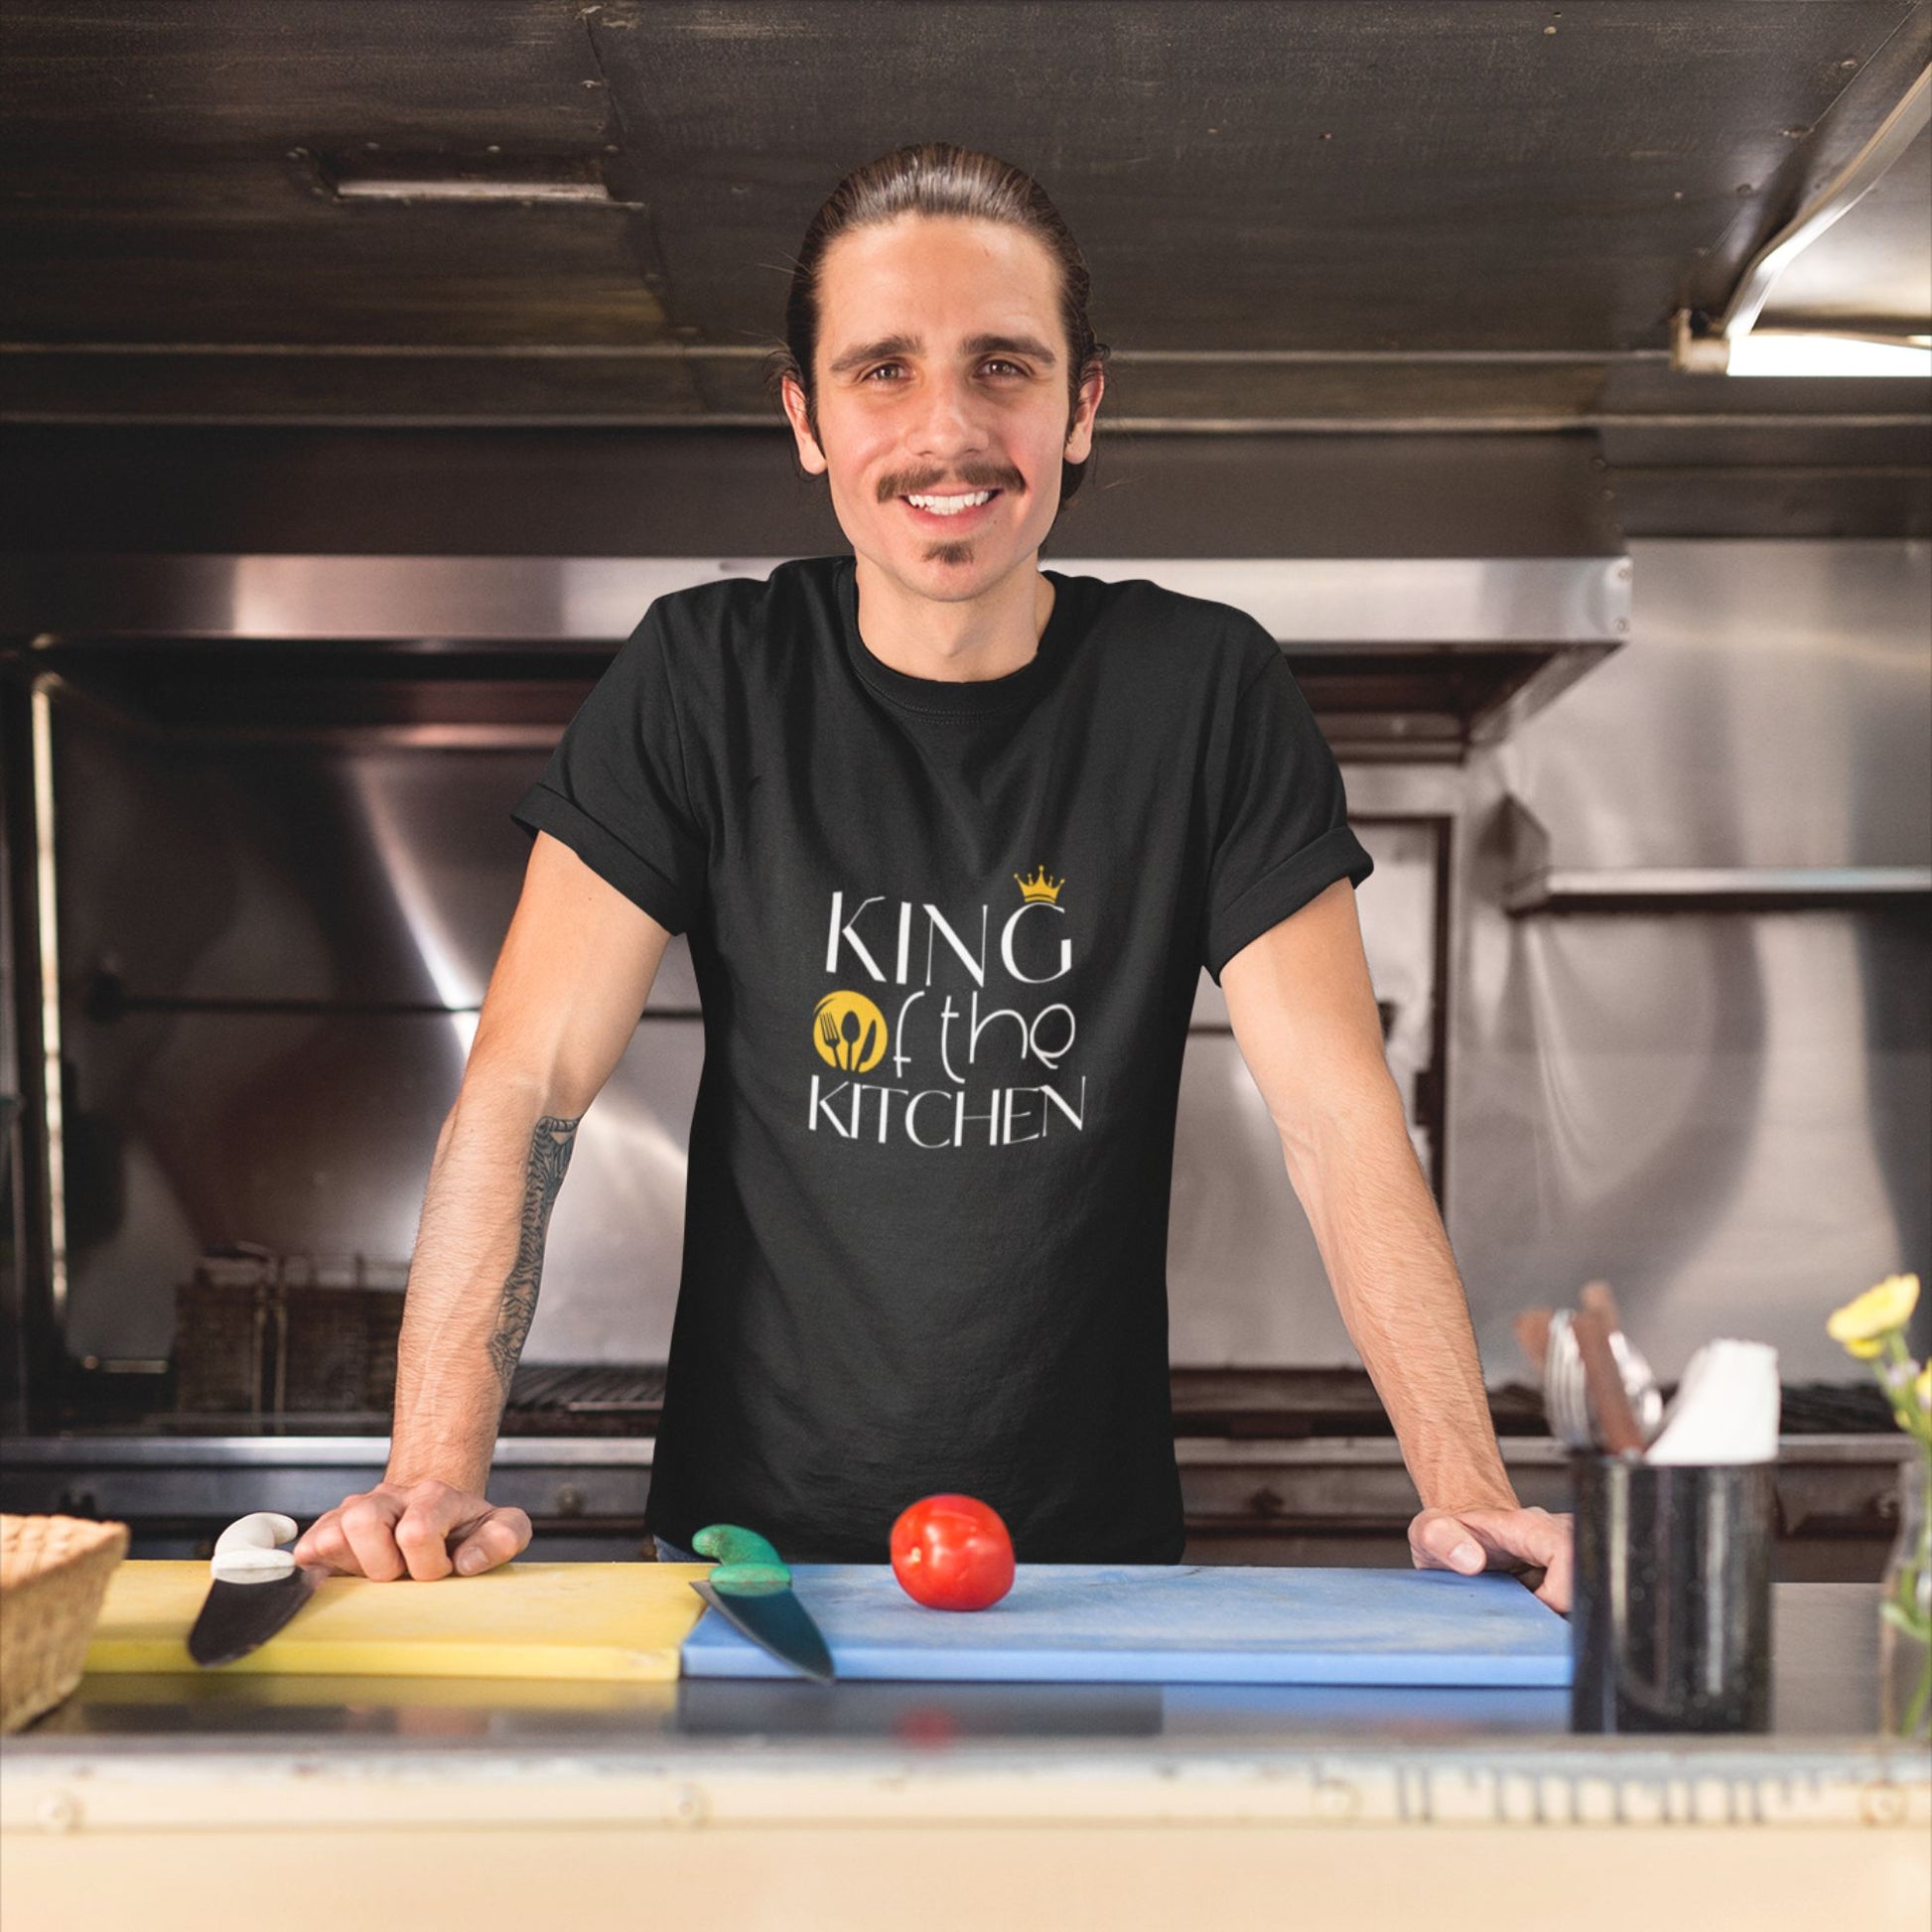 "King of the kitchen" custom made T-Shirt fpr Hobby Chefs, in black